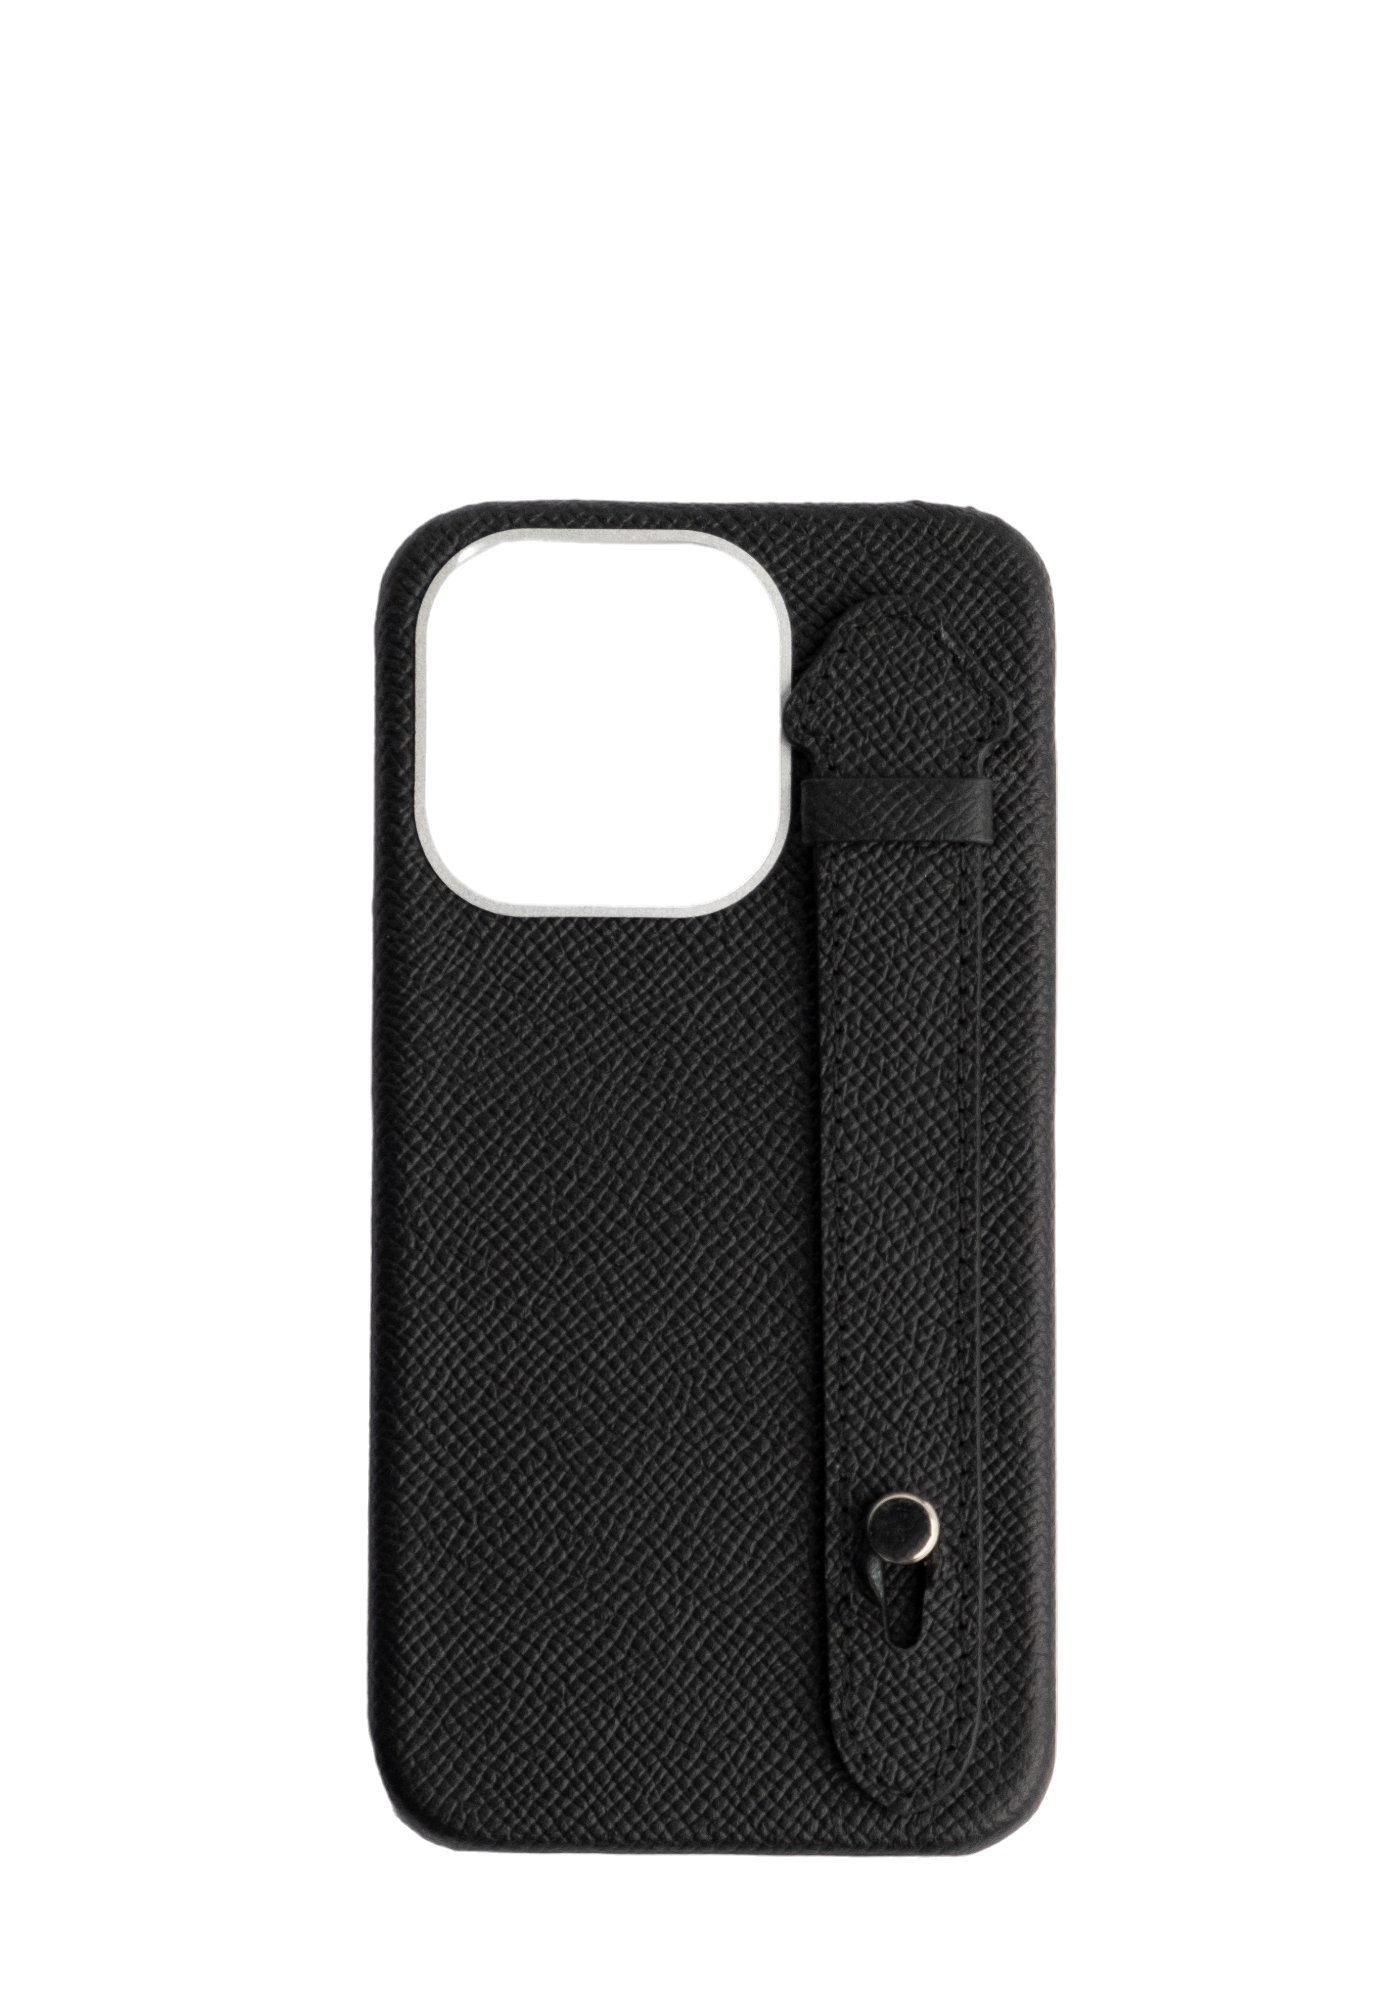 Leather Strap iPhone Case